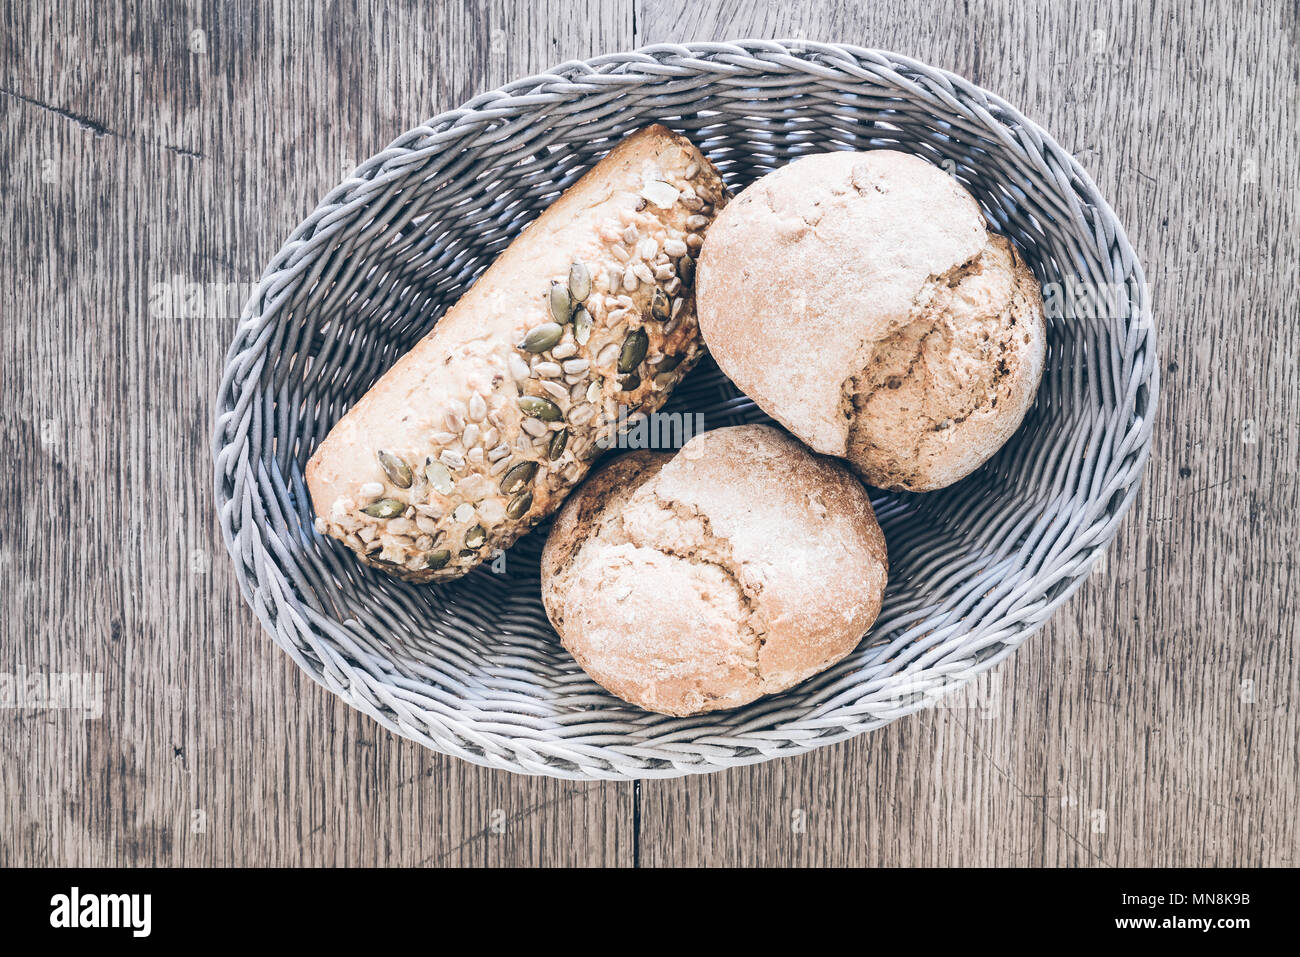 top view of basket with German style bread rolls on rustic wooden table Stock Photo